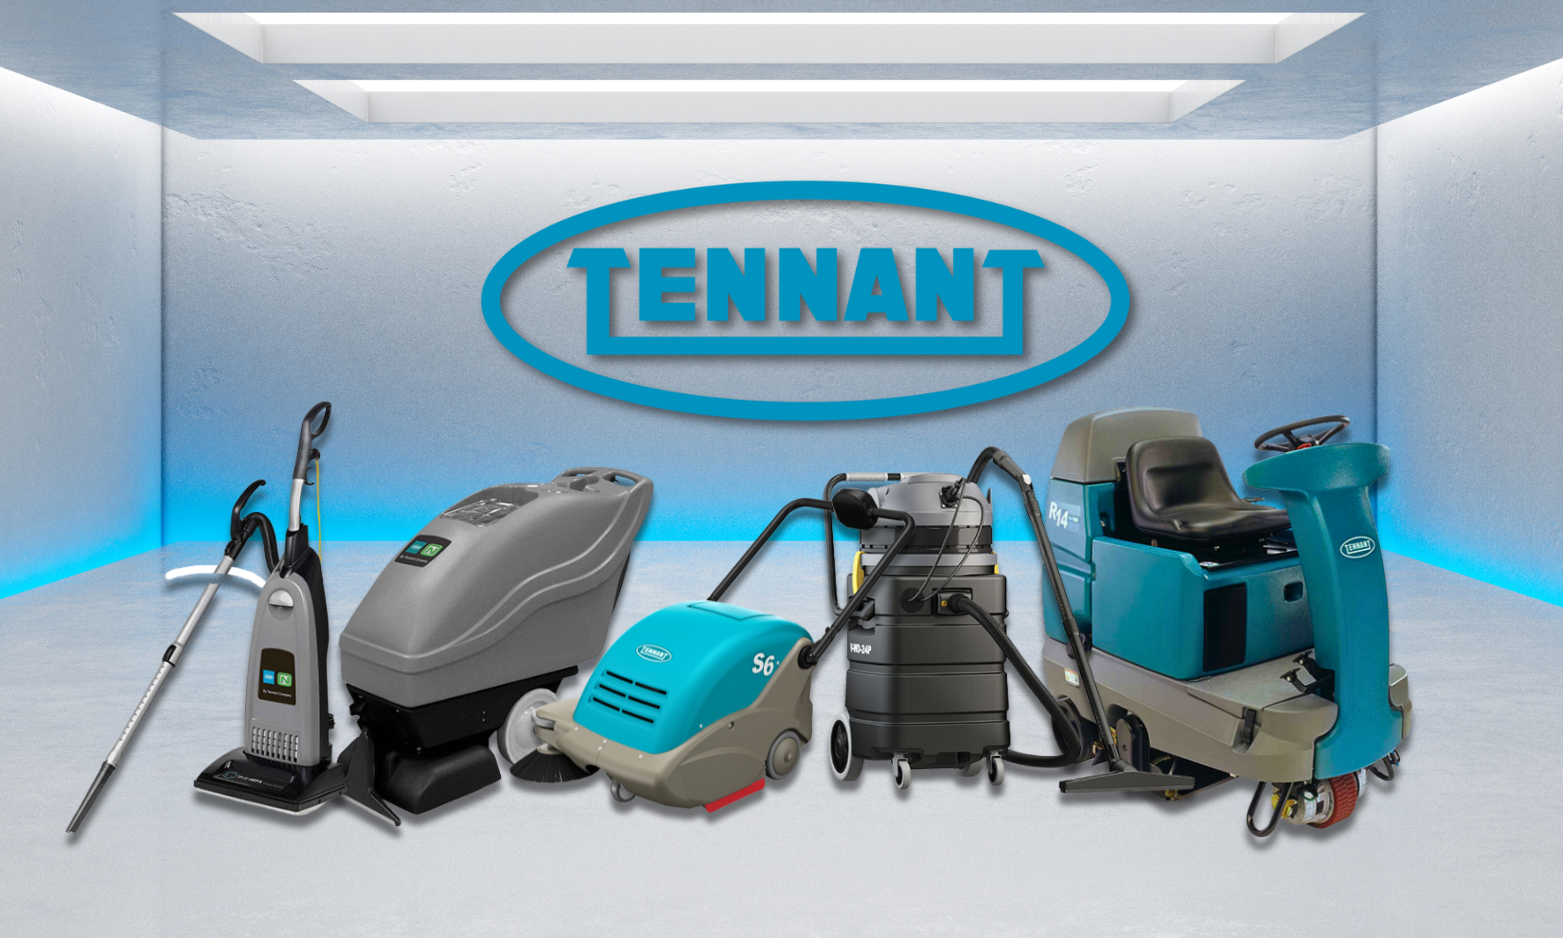 Visit Tennant Carpet Cleaning Equipment, Vacuums, Extractors, and Sweepers at Imperial Dade Minnesota